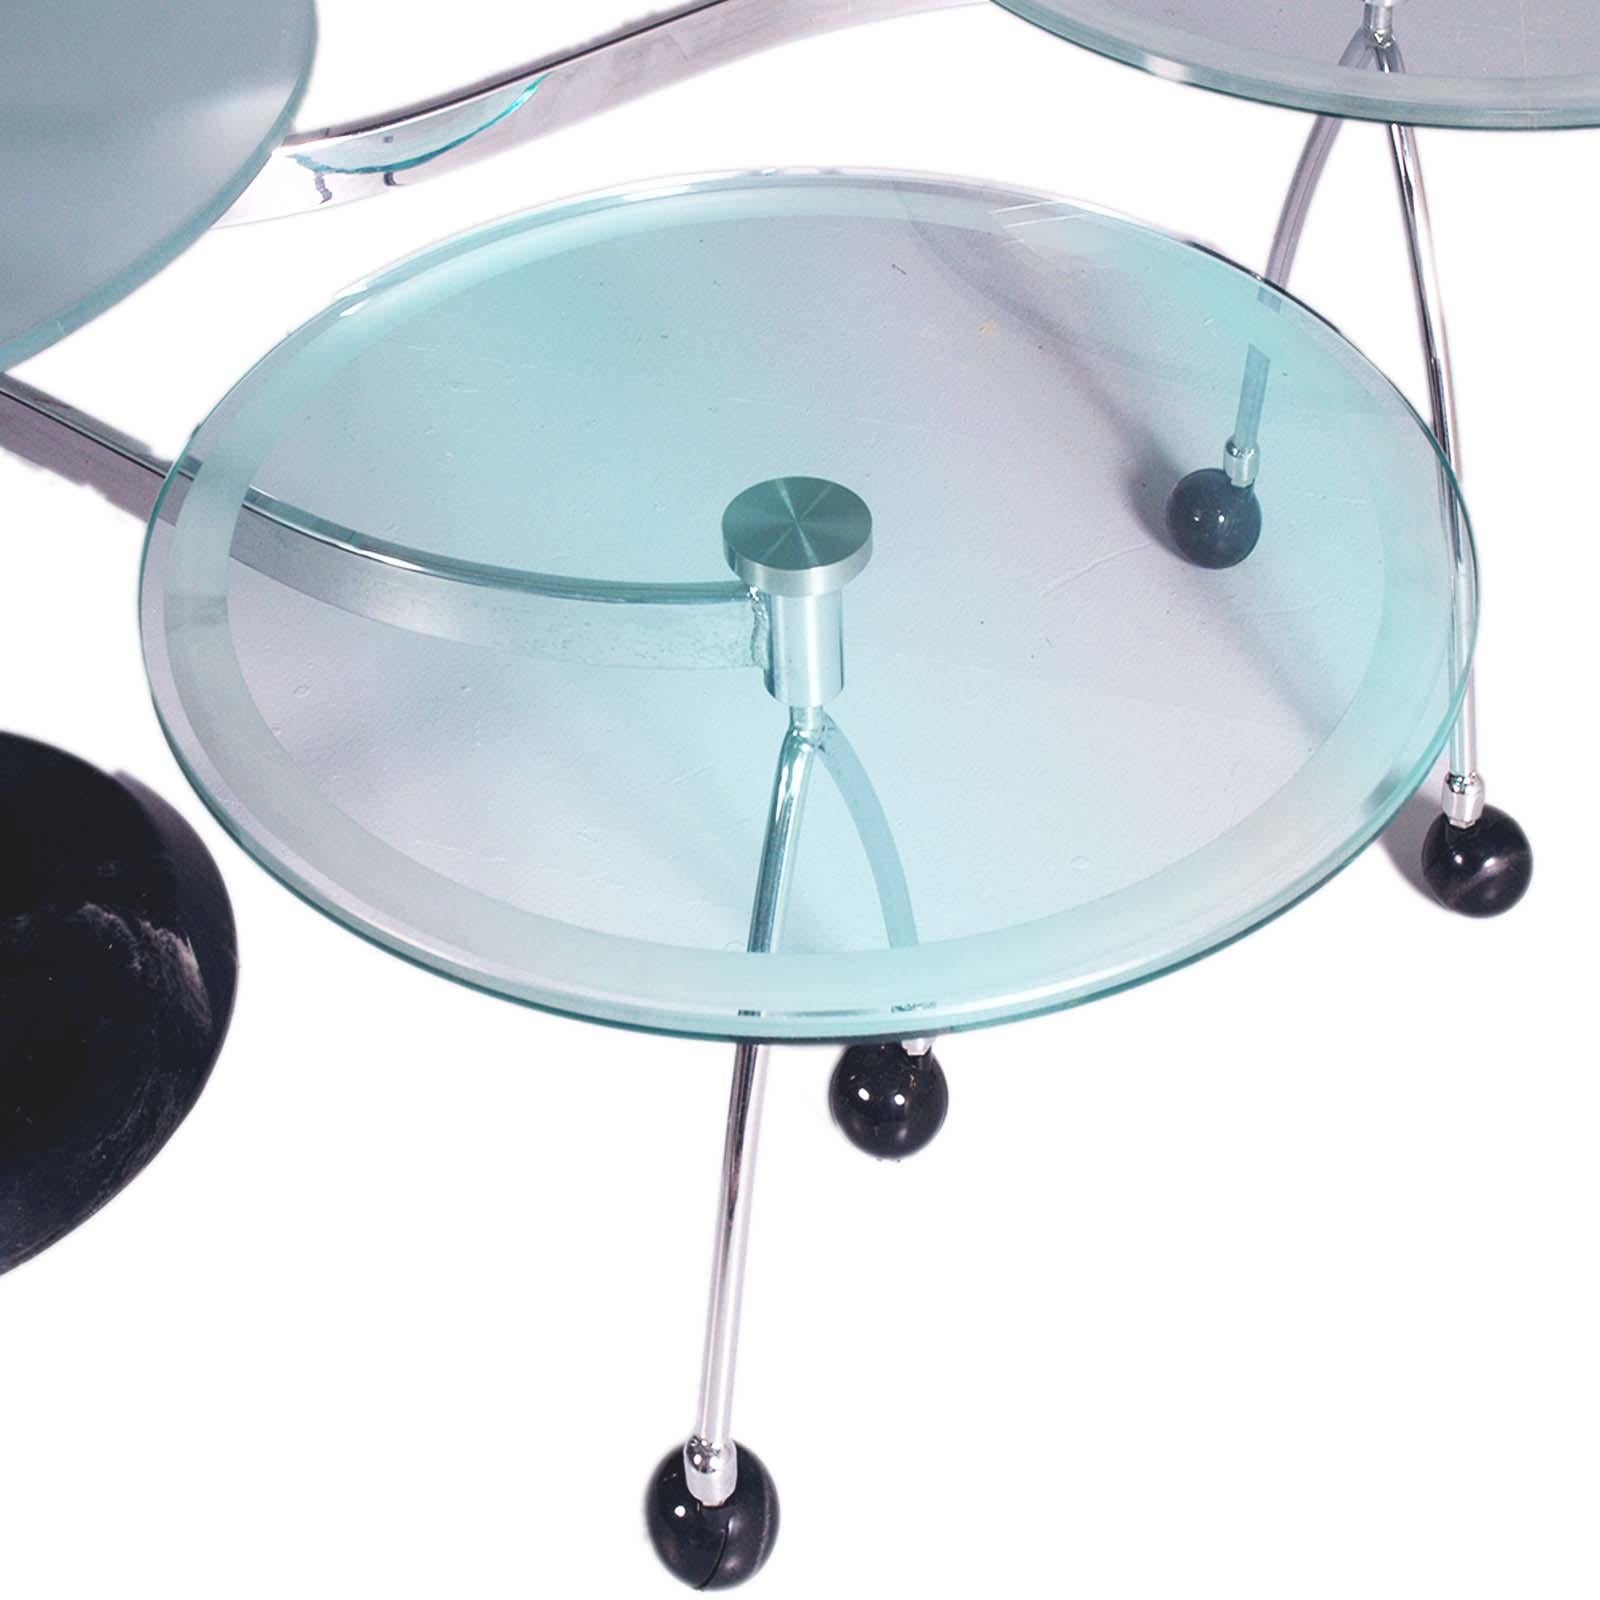 Modern 1970s triple round coffee table with two rotating satellites in sandblasted crystal, chromed metal structure with black marble base. Spherical swivel wheels. Very accurate and robust execution of the object. The two satellite tables rotate